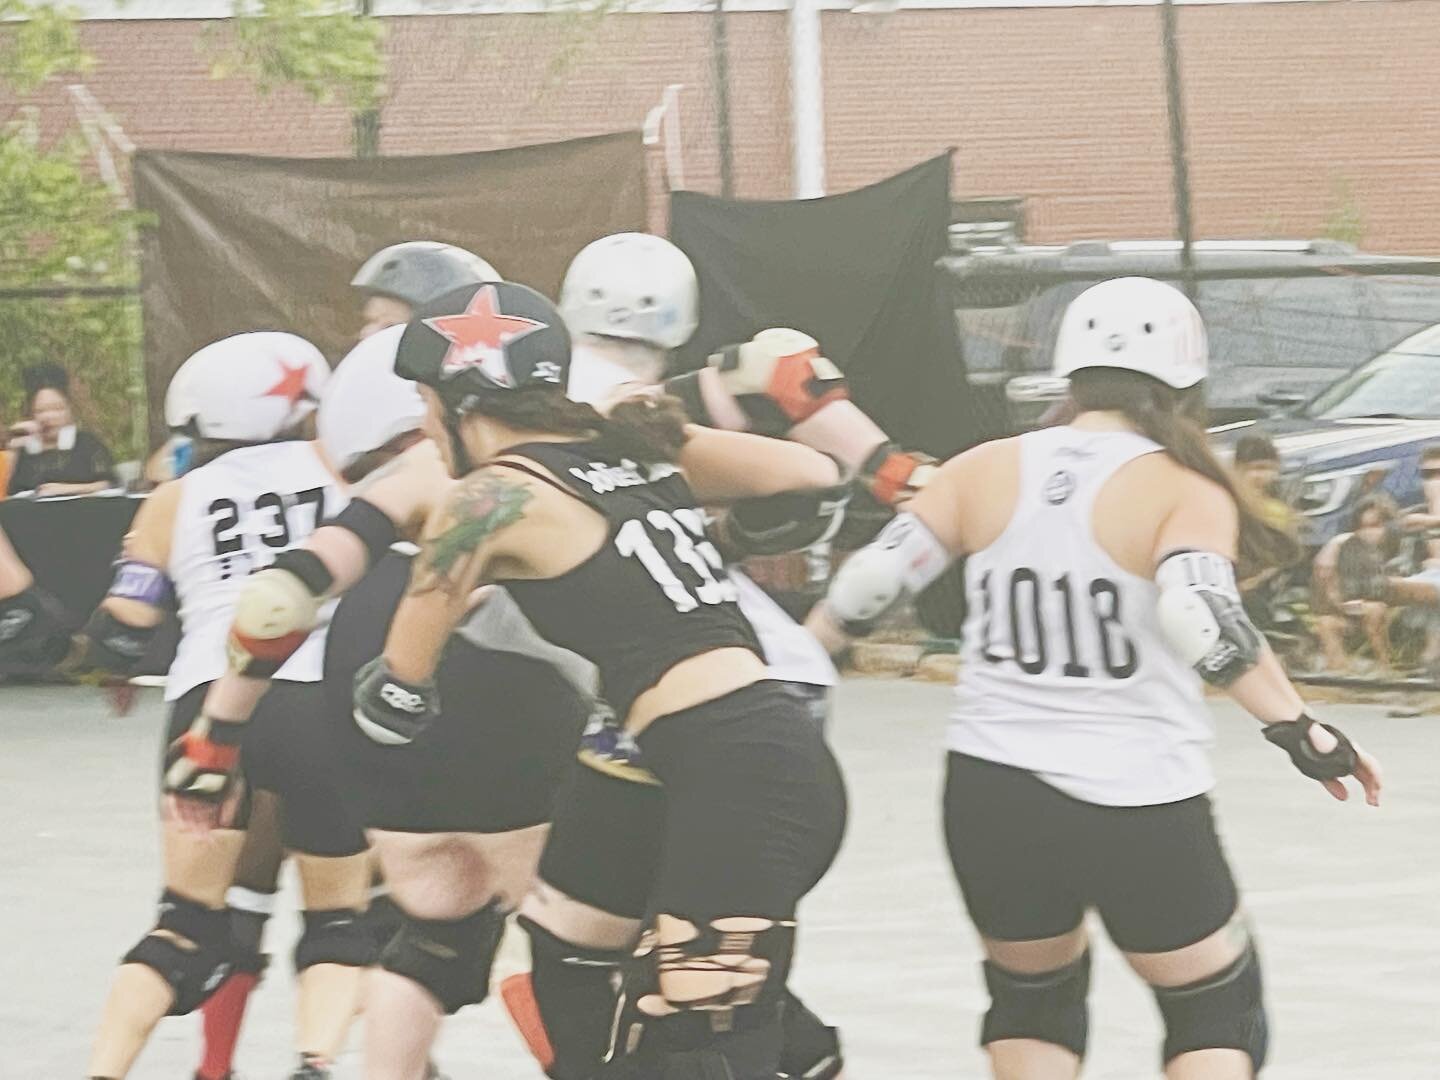 Derby with the @texasrollergirls! Proud to be sponsoring these terrific people this season. Y&rsquo;all come out this season. This team is amazing! #texasrollerderby @dtrigger2113 #thingstodoinatx #austintxlife #sponsorship #austinsponsorships #goodc